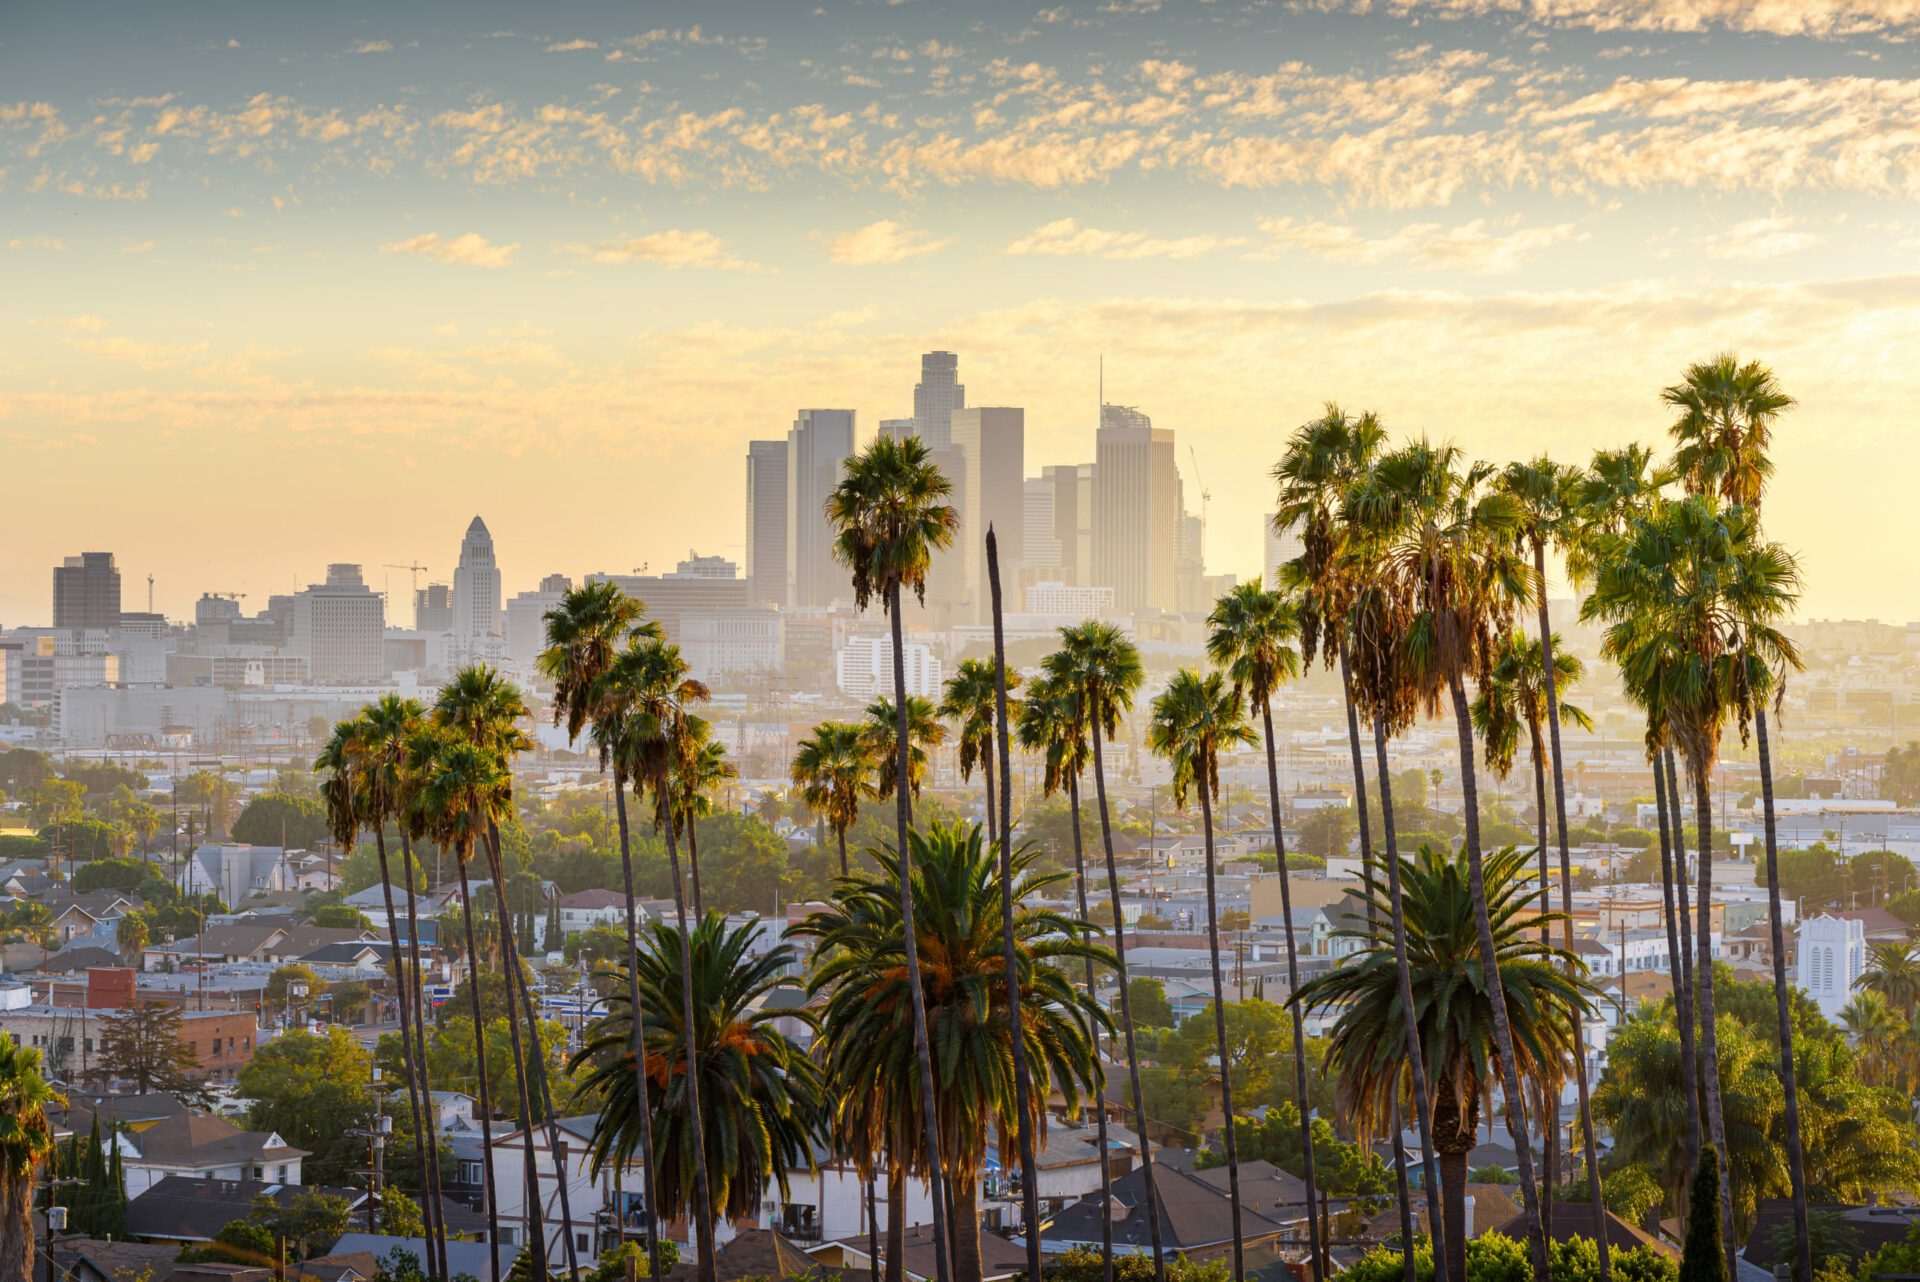 Built in LA: Genies Gained $150M, Obsidian Raised $90M, and More LA Tech News